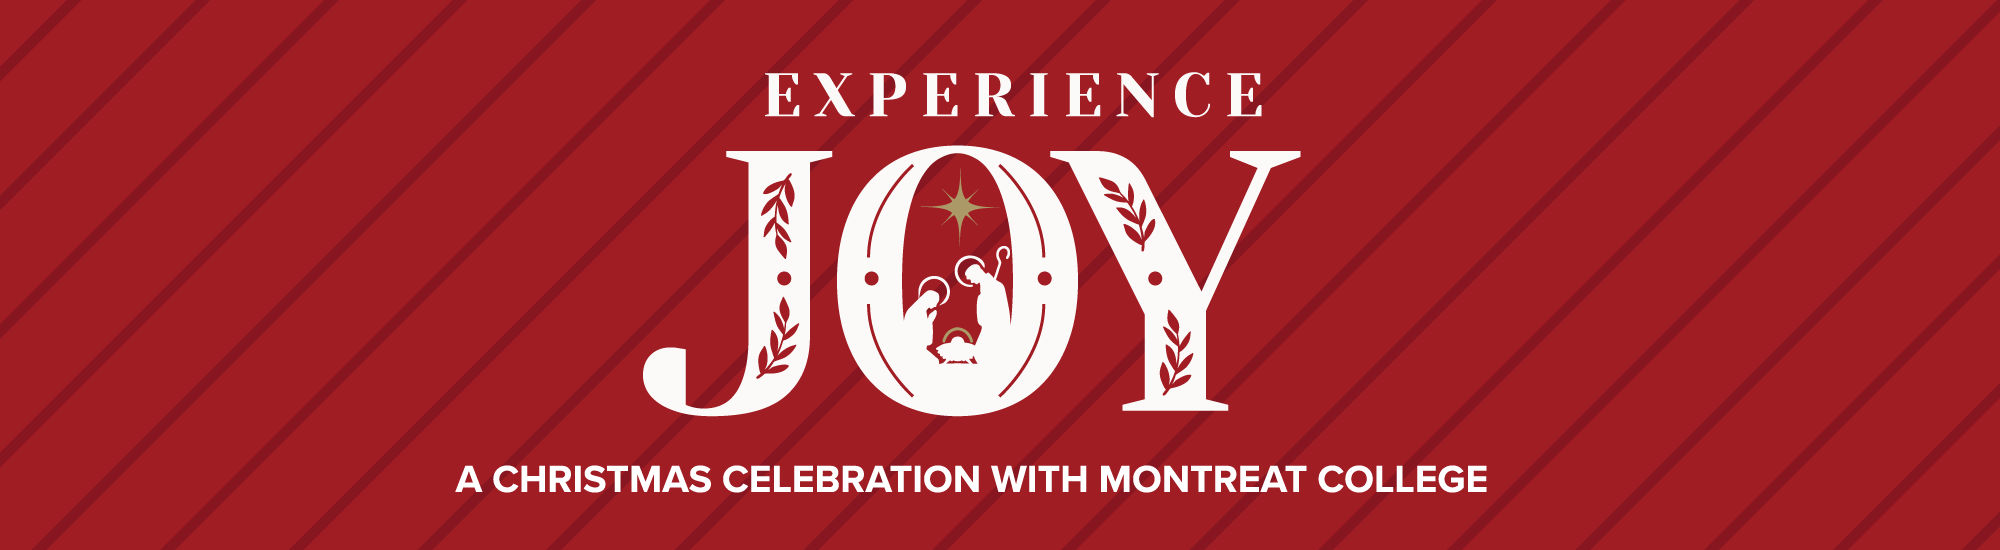 Experience Joy: A Christmas Celebration with Montreat College header